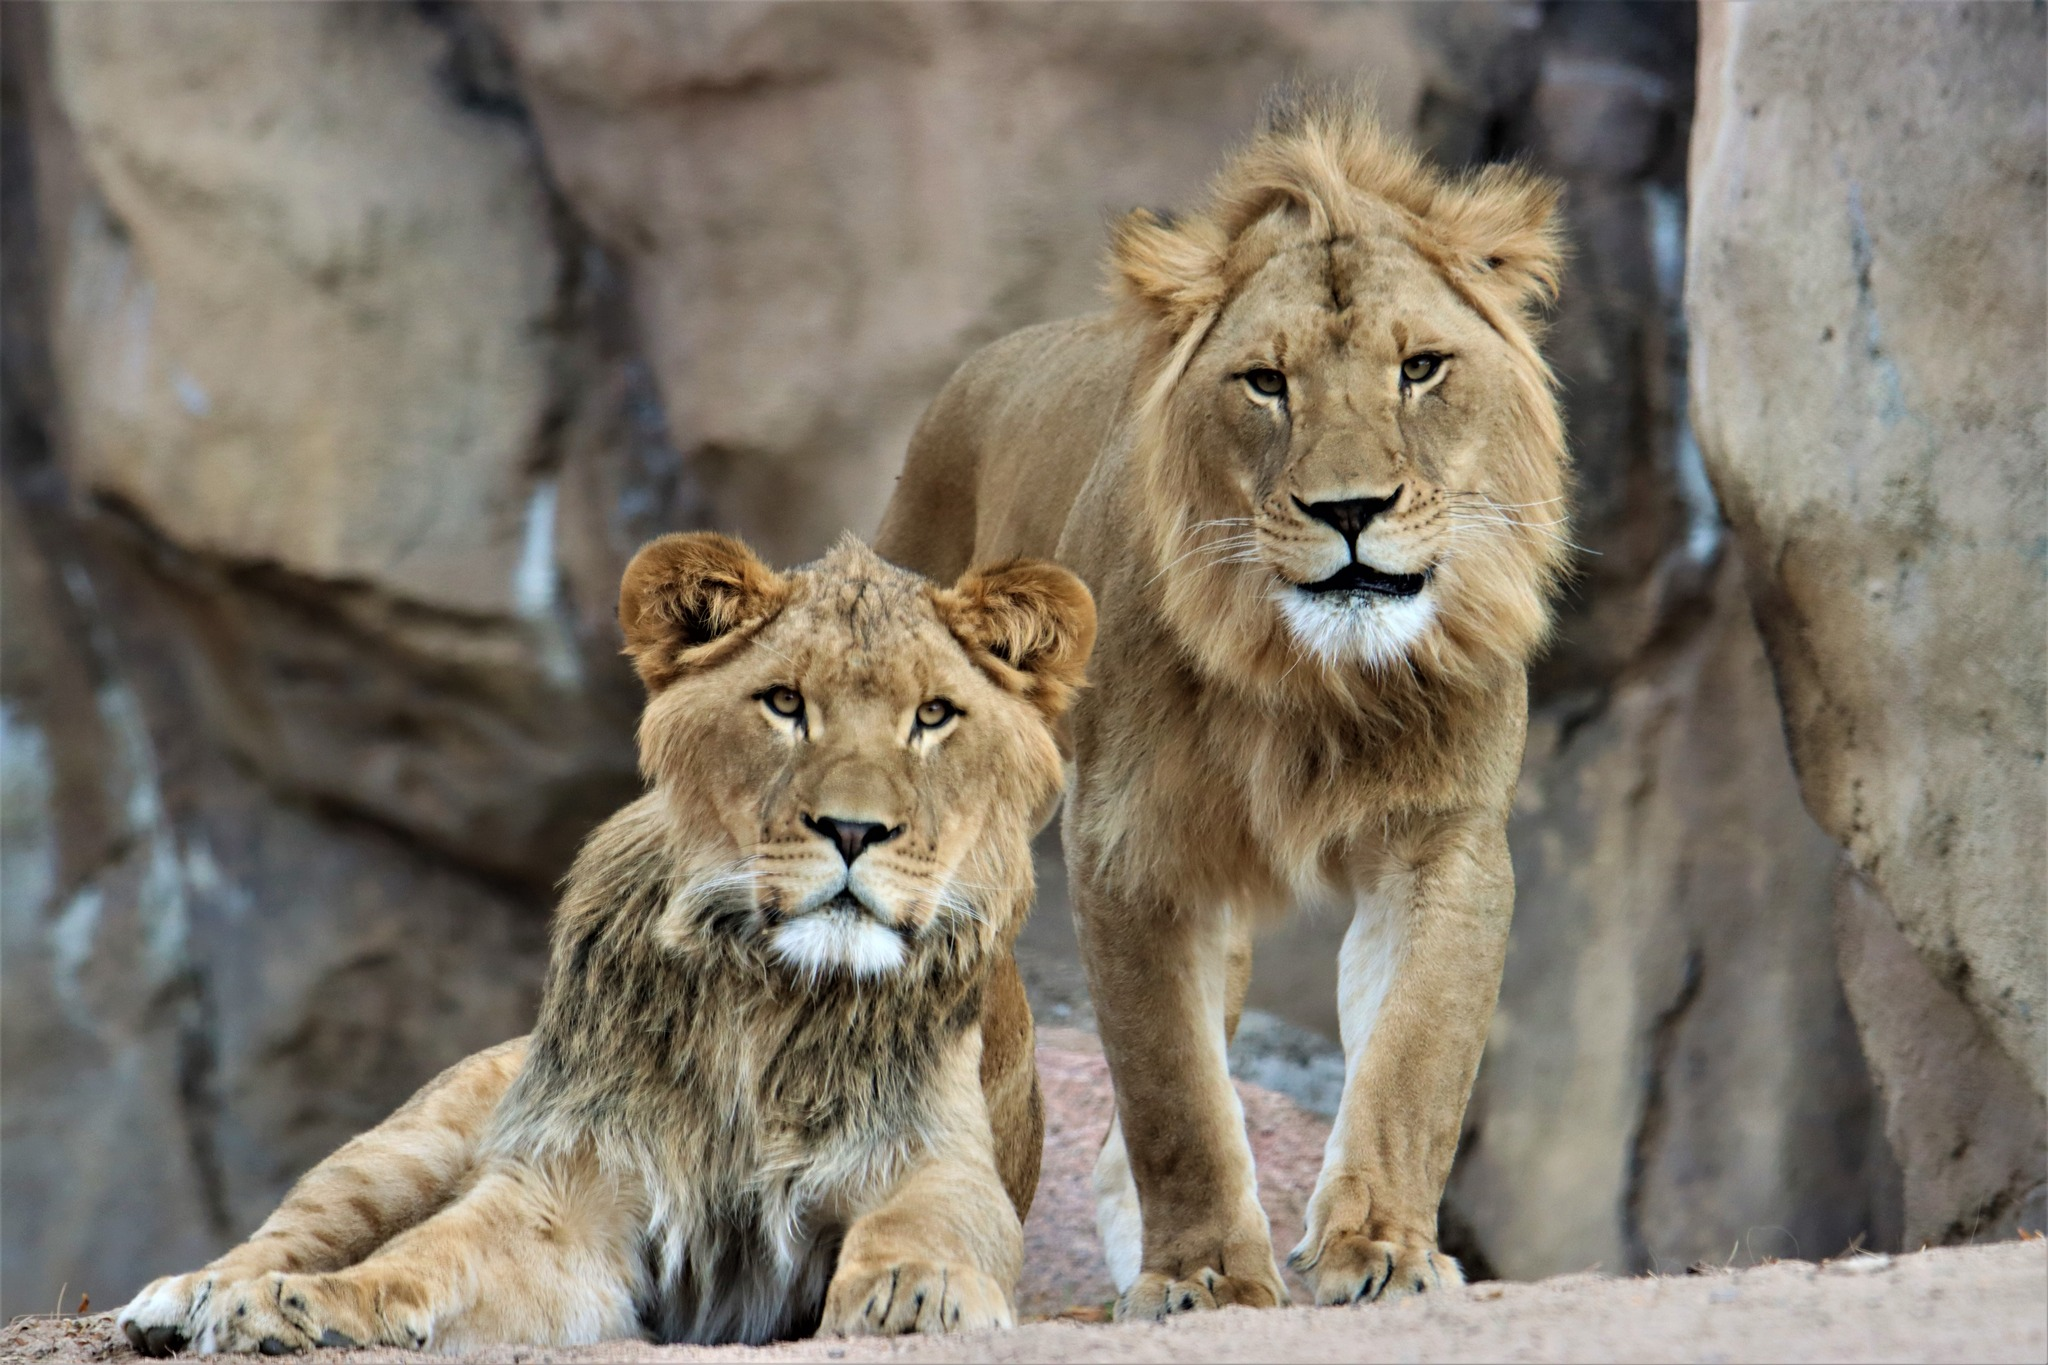 Two lions at the Denver Zoo — visiting here is one of the most fun corporate event ideas 